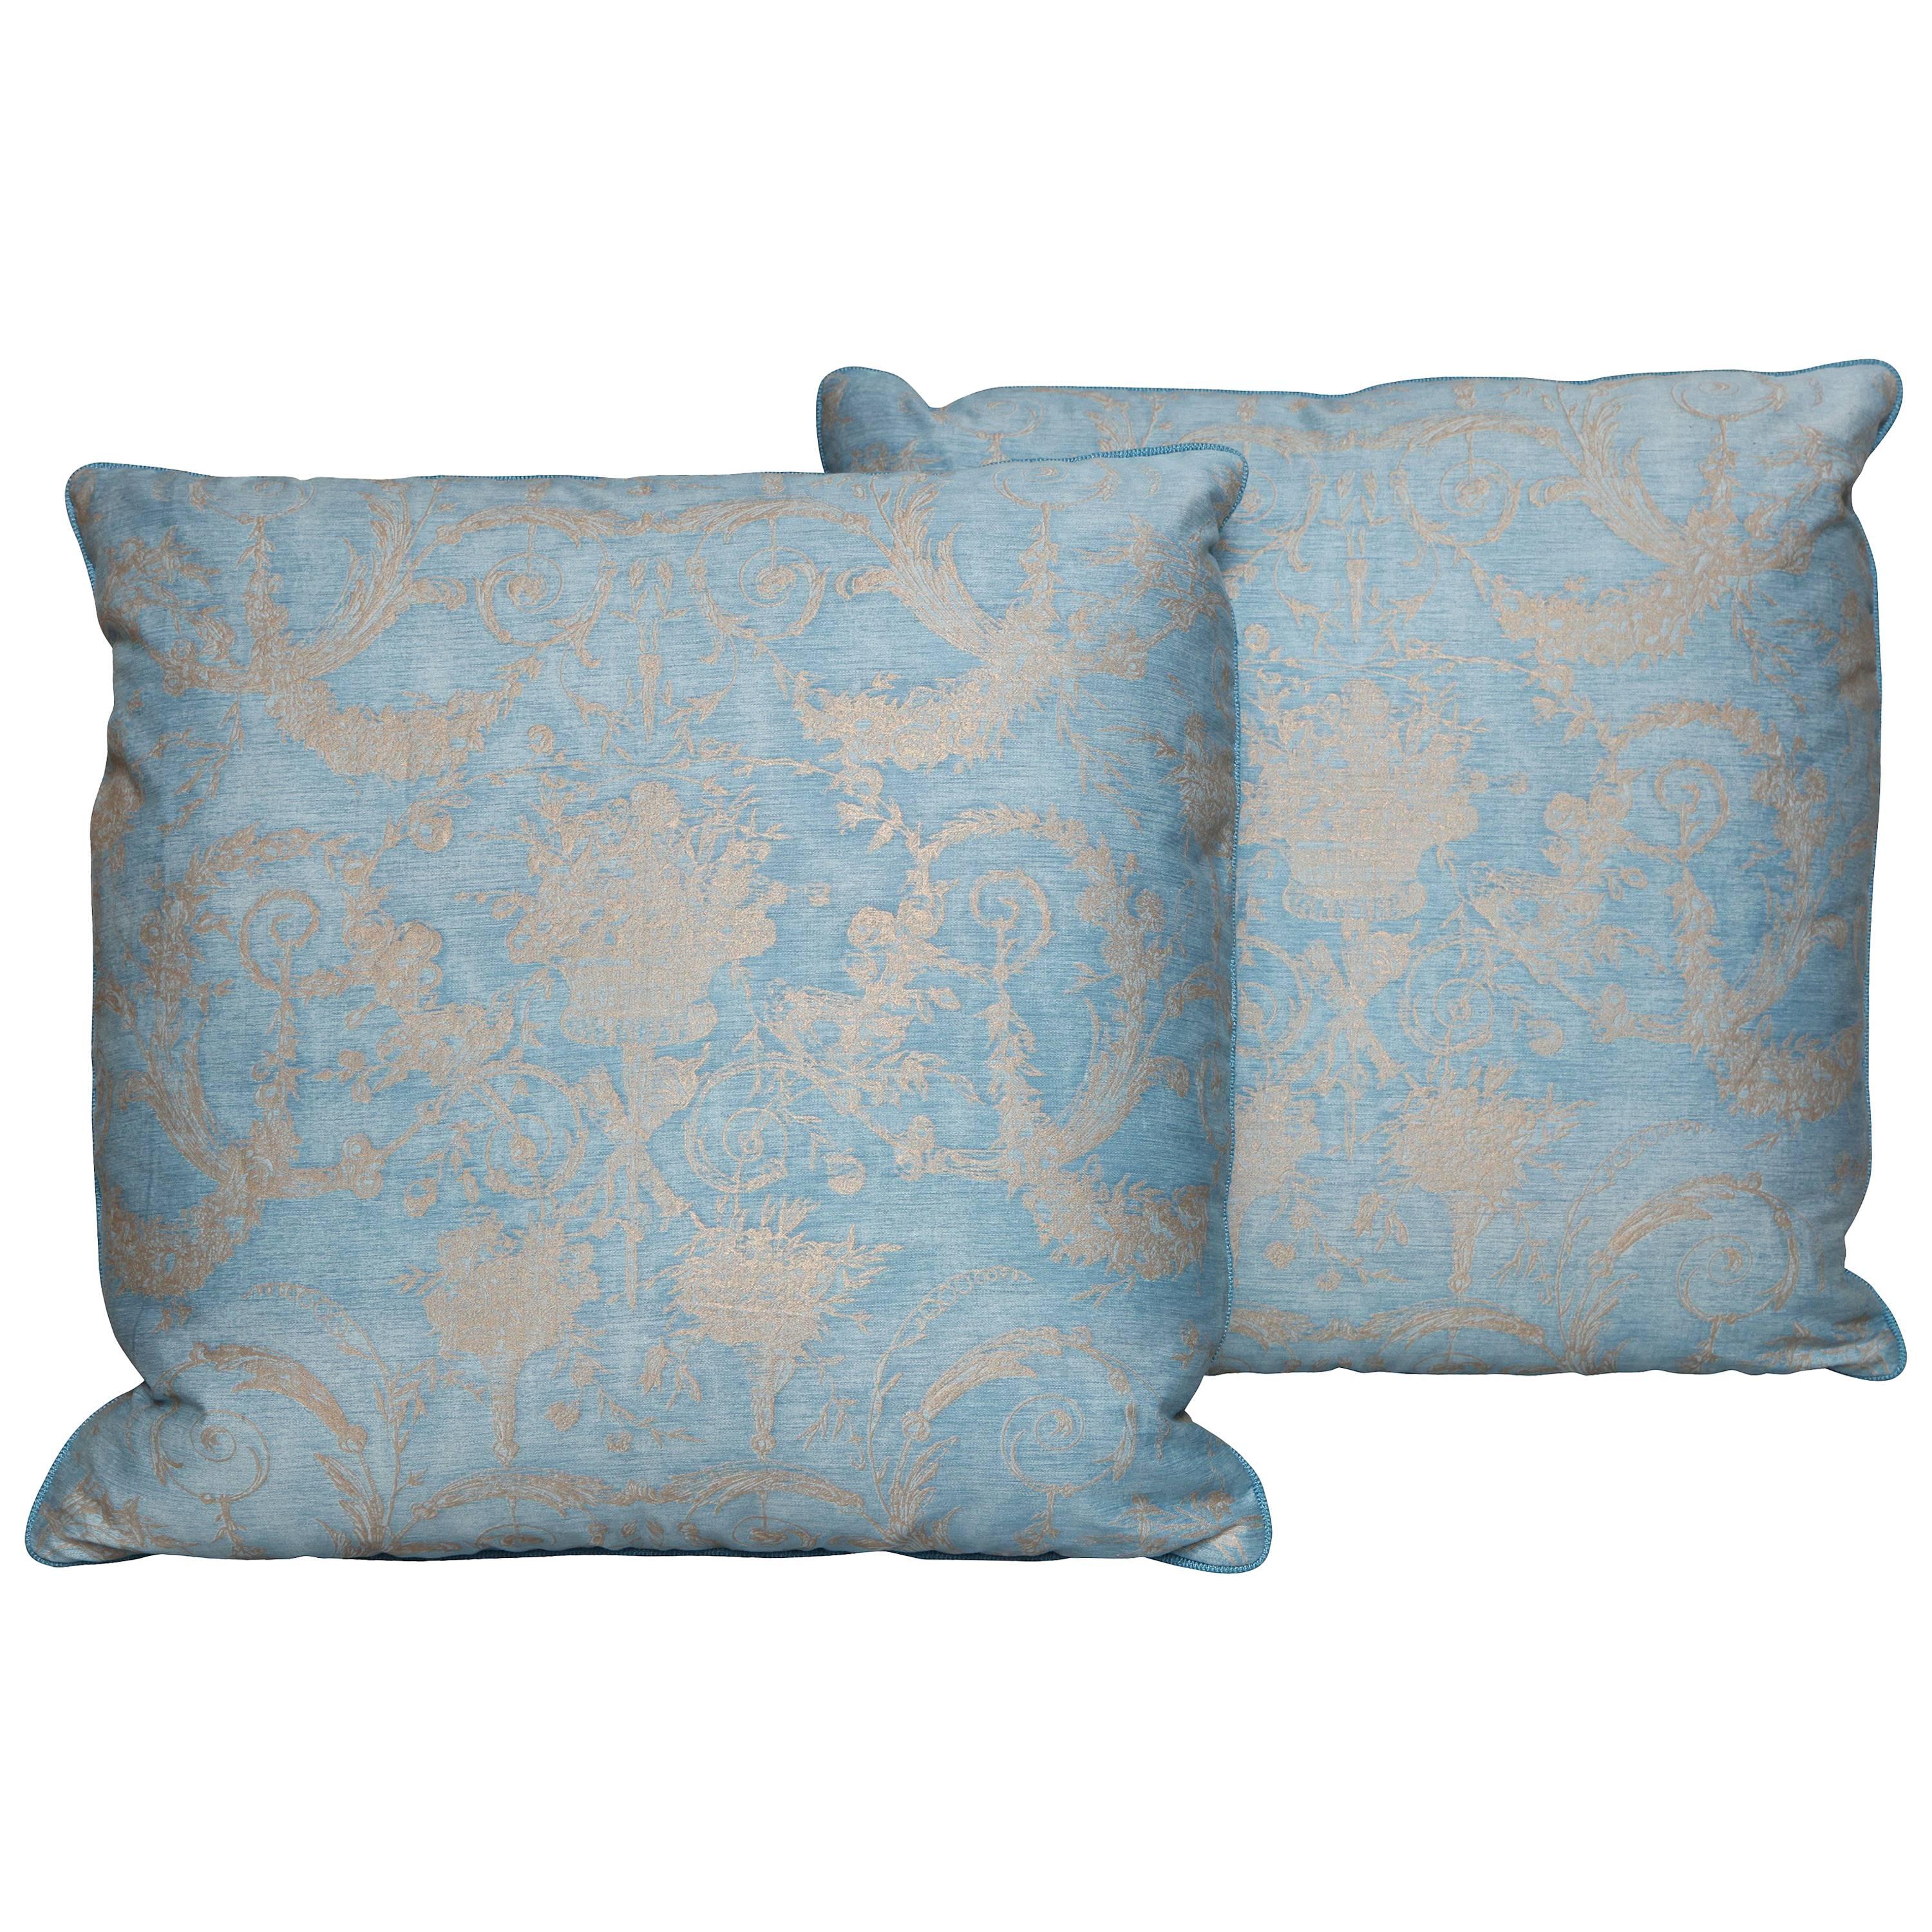 Pair of Fortuny Fabric Cushions in the Festoni Pattern